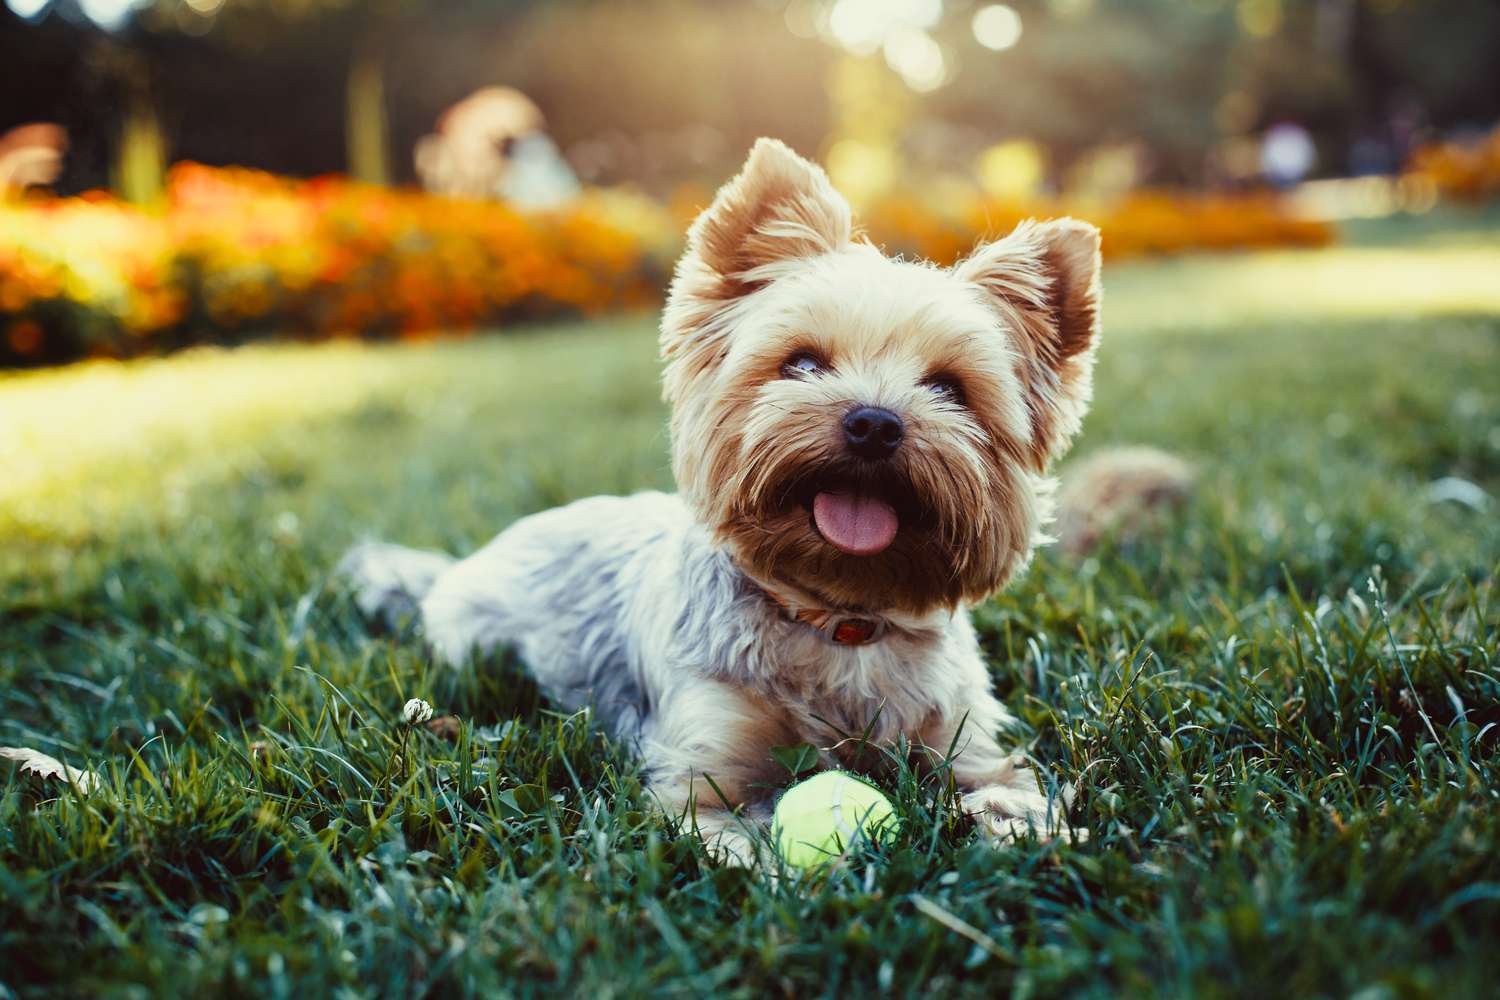 yorkshire terrier playing with a ball on a grass